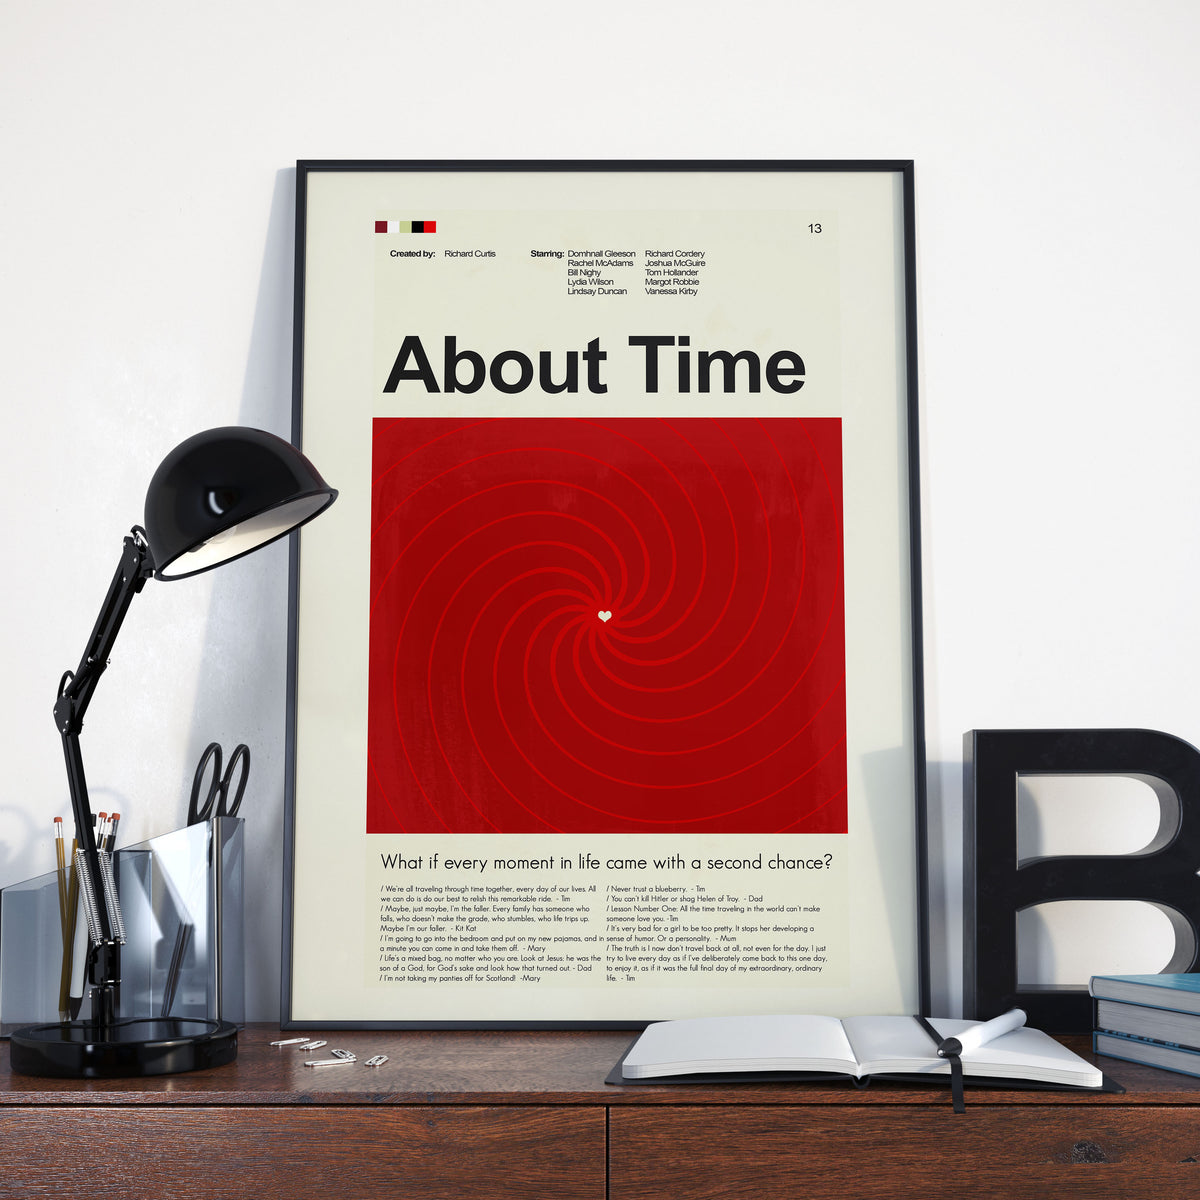 About Time - Time Warp | 12"x18" or 18"x24" Print only